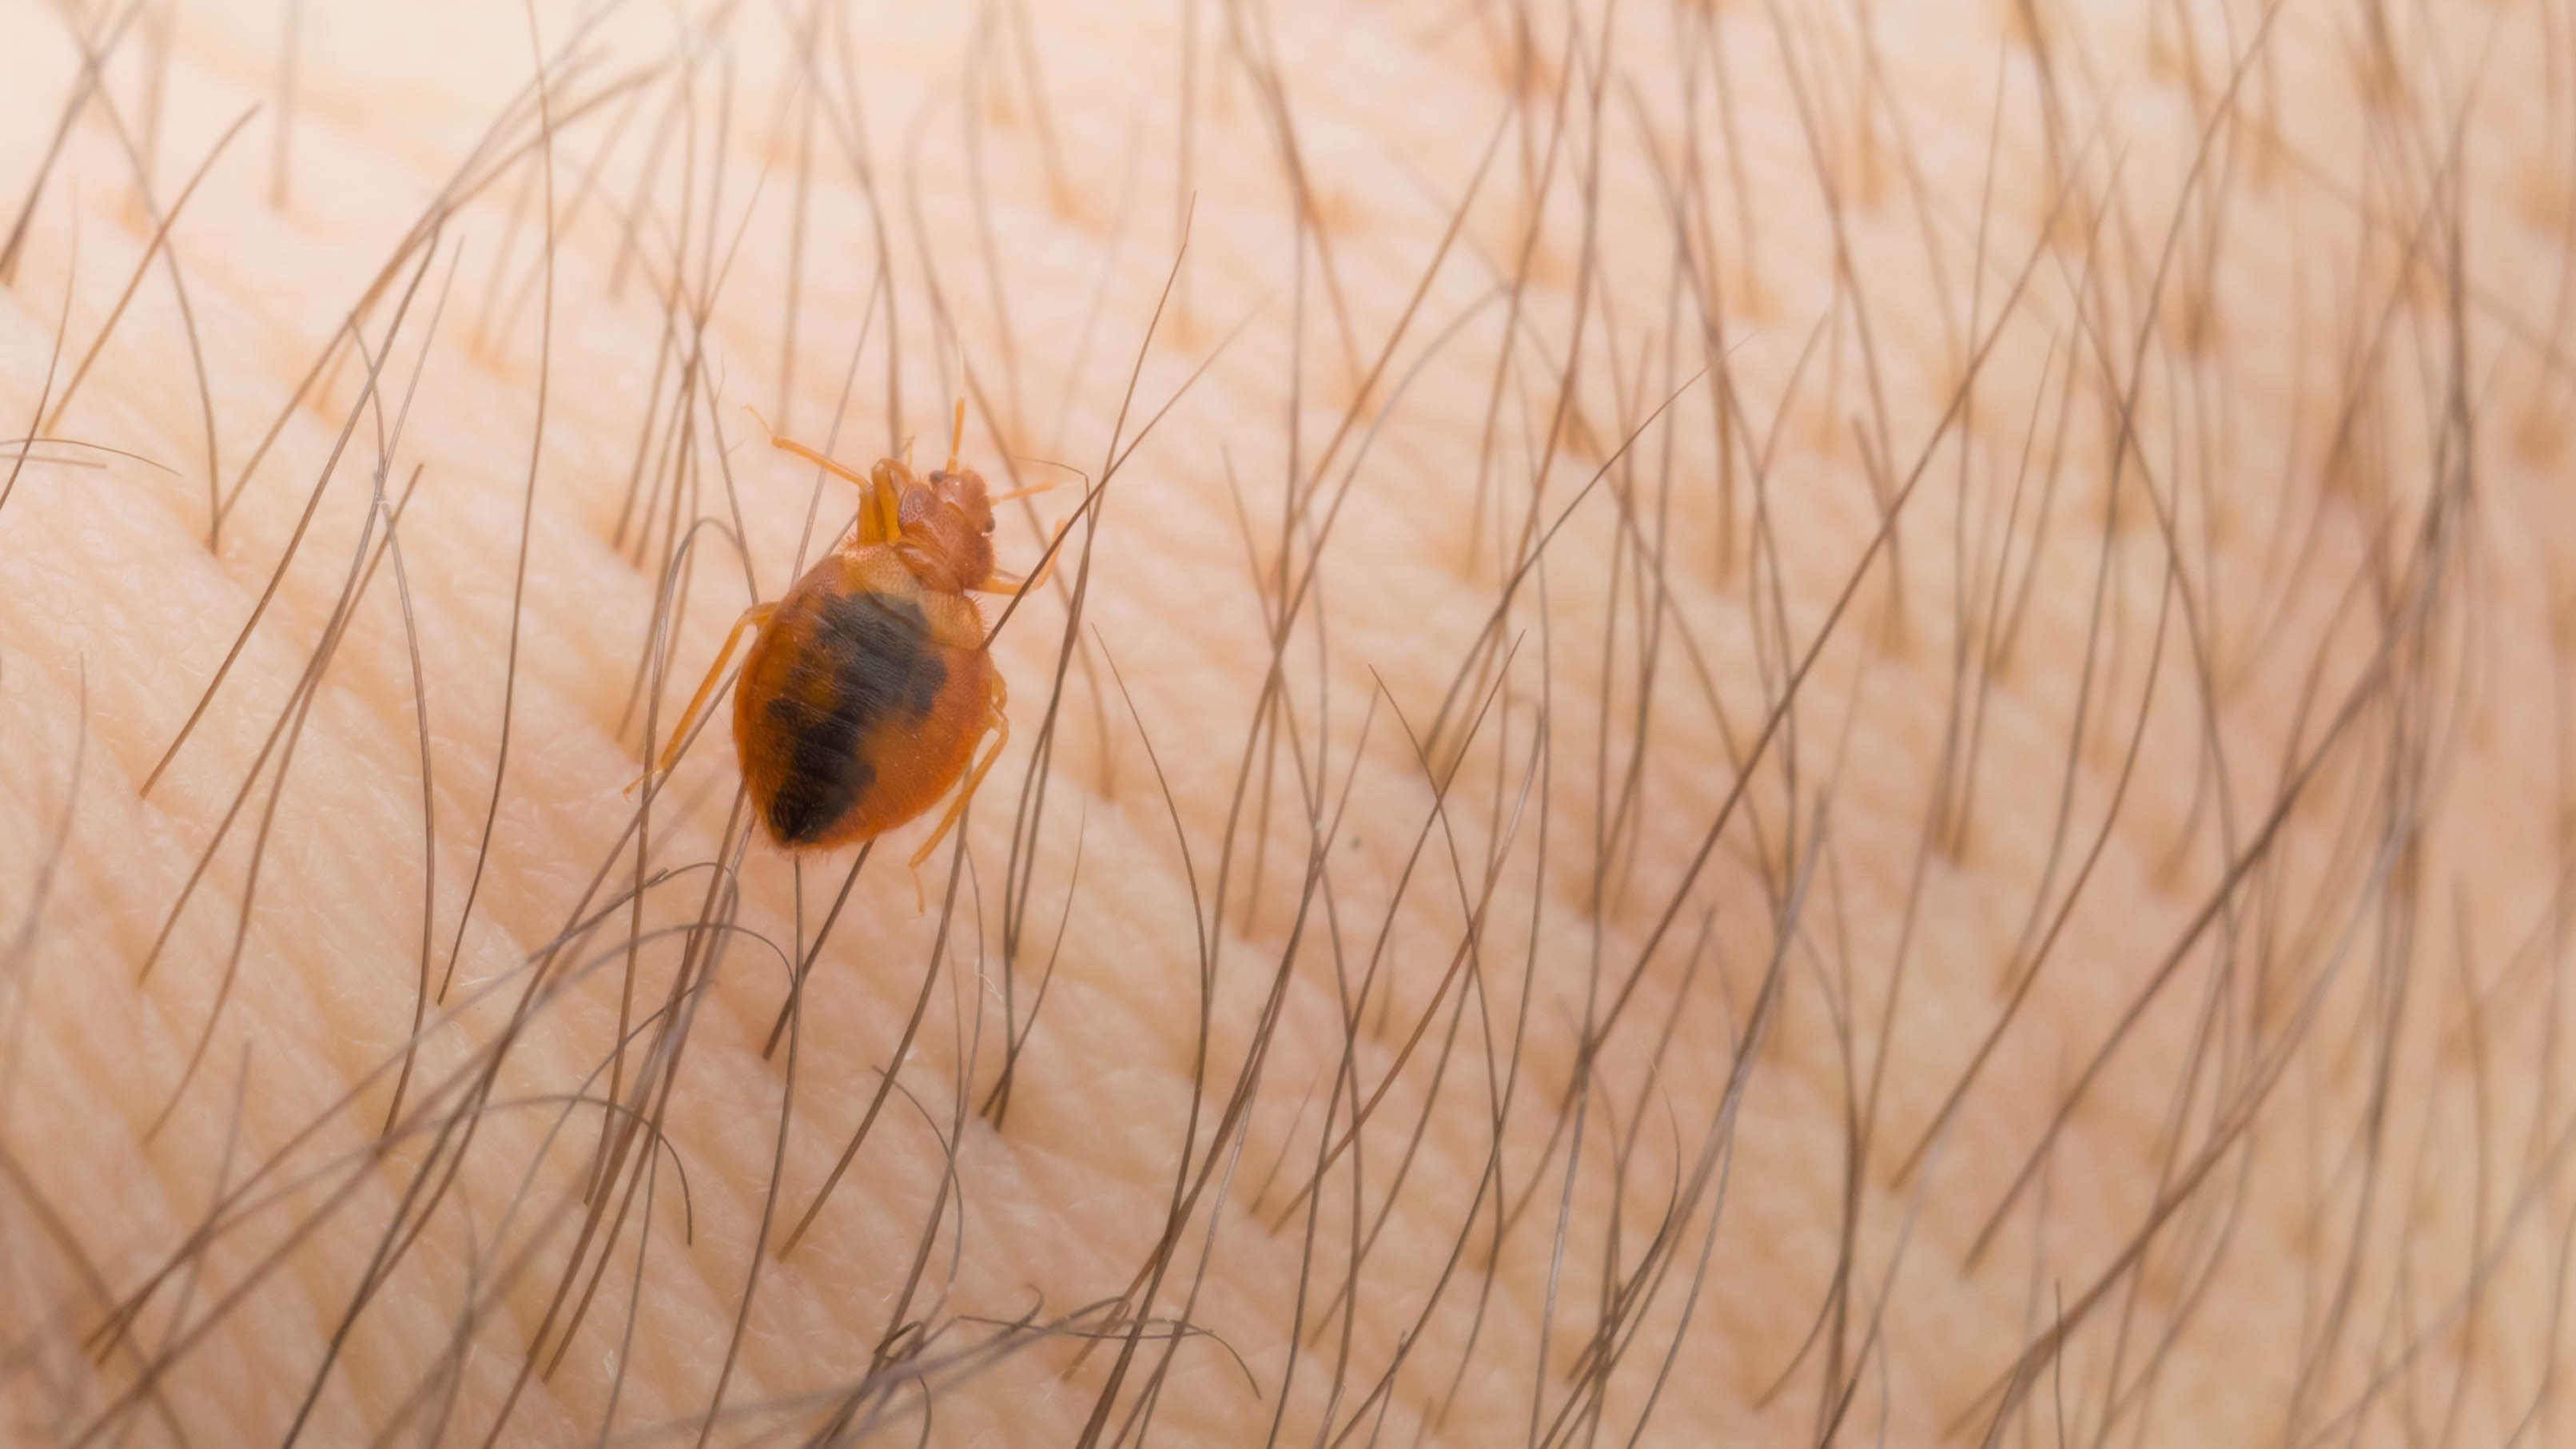 A close up of a bed bug on skin